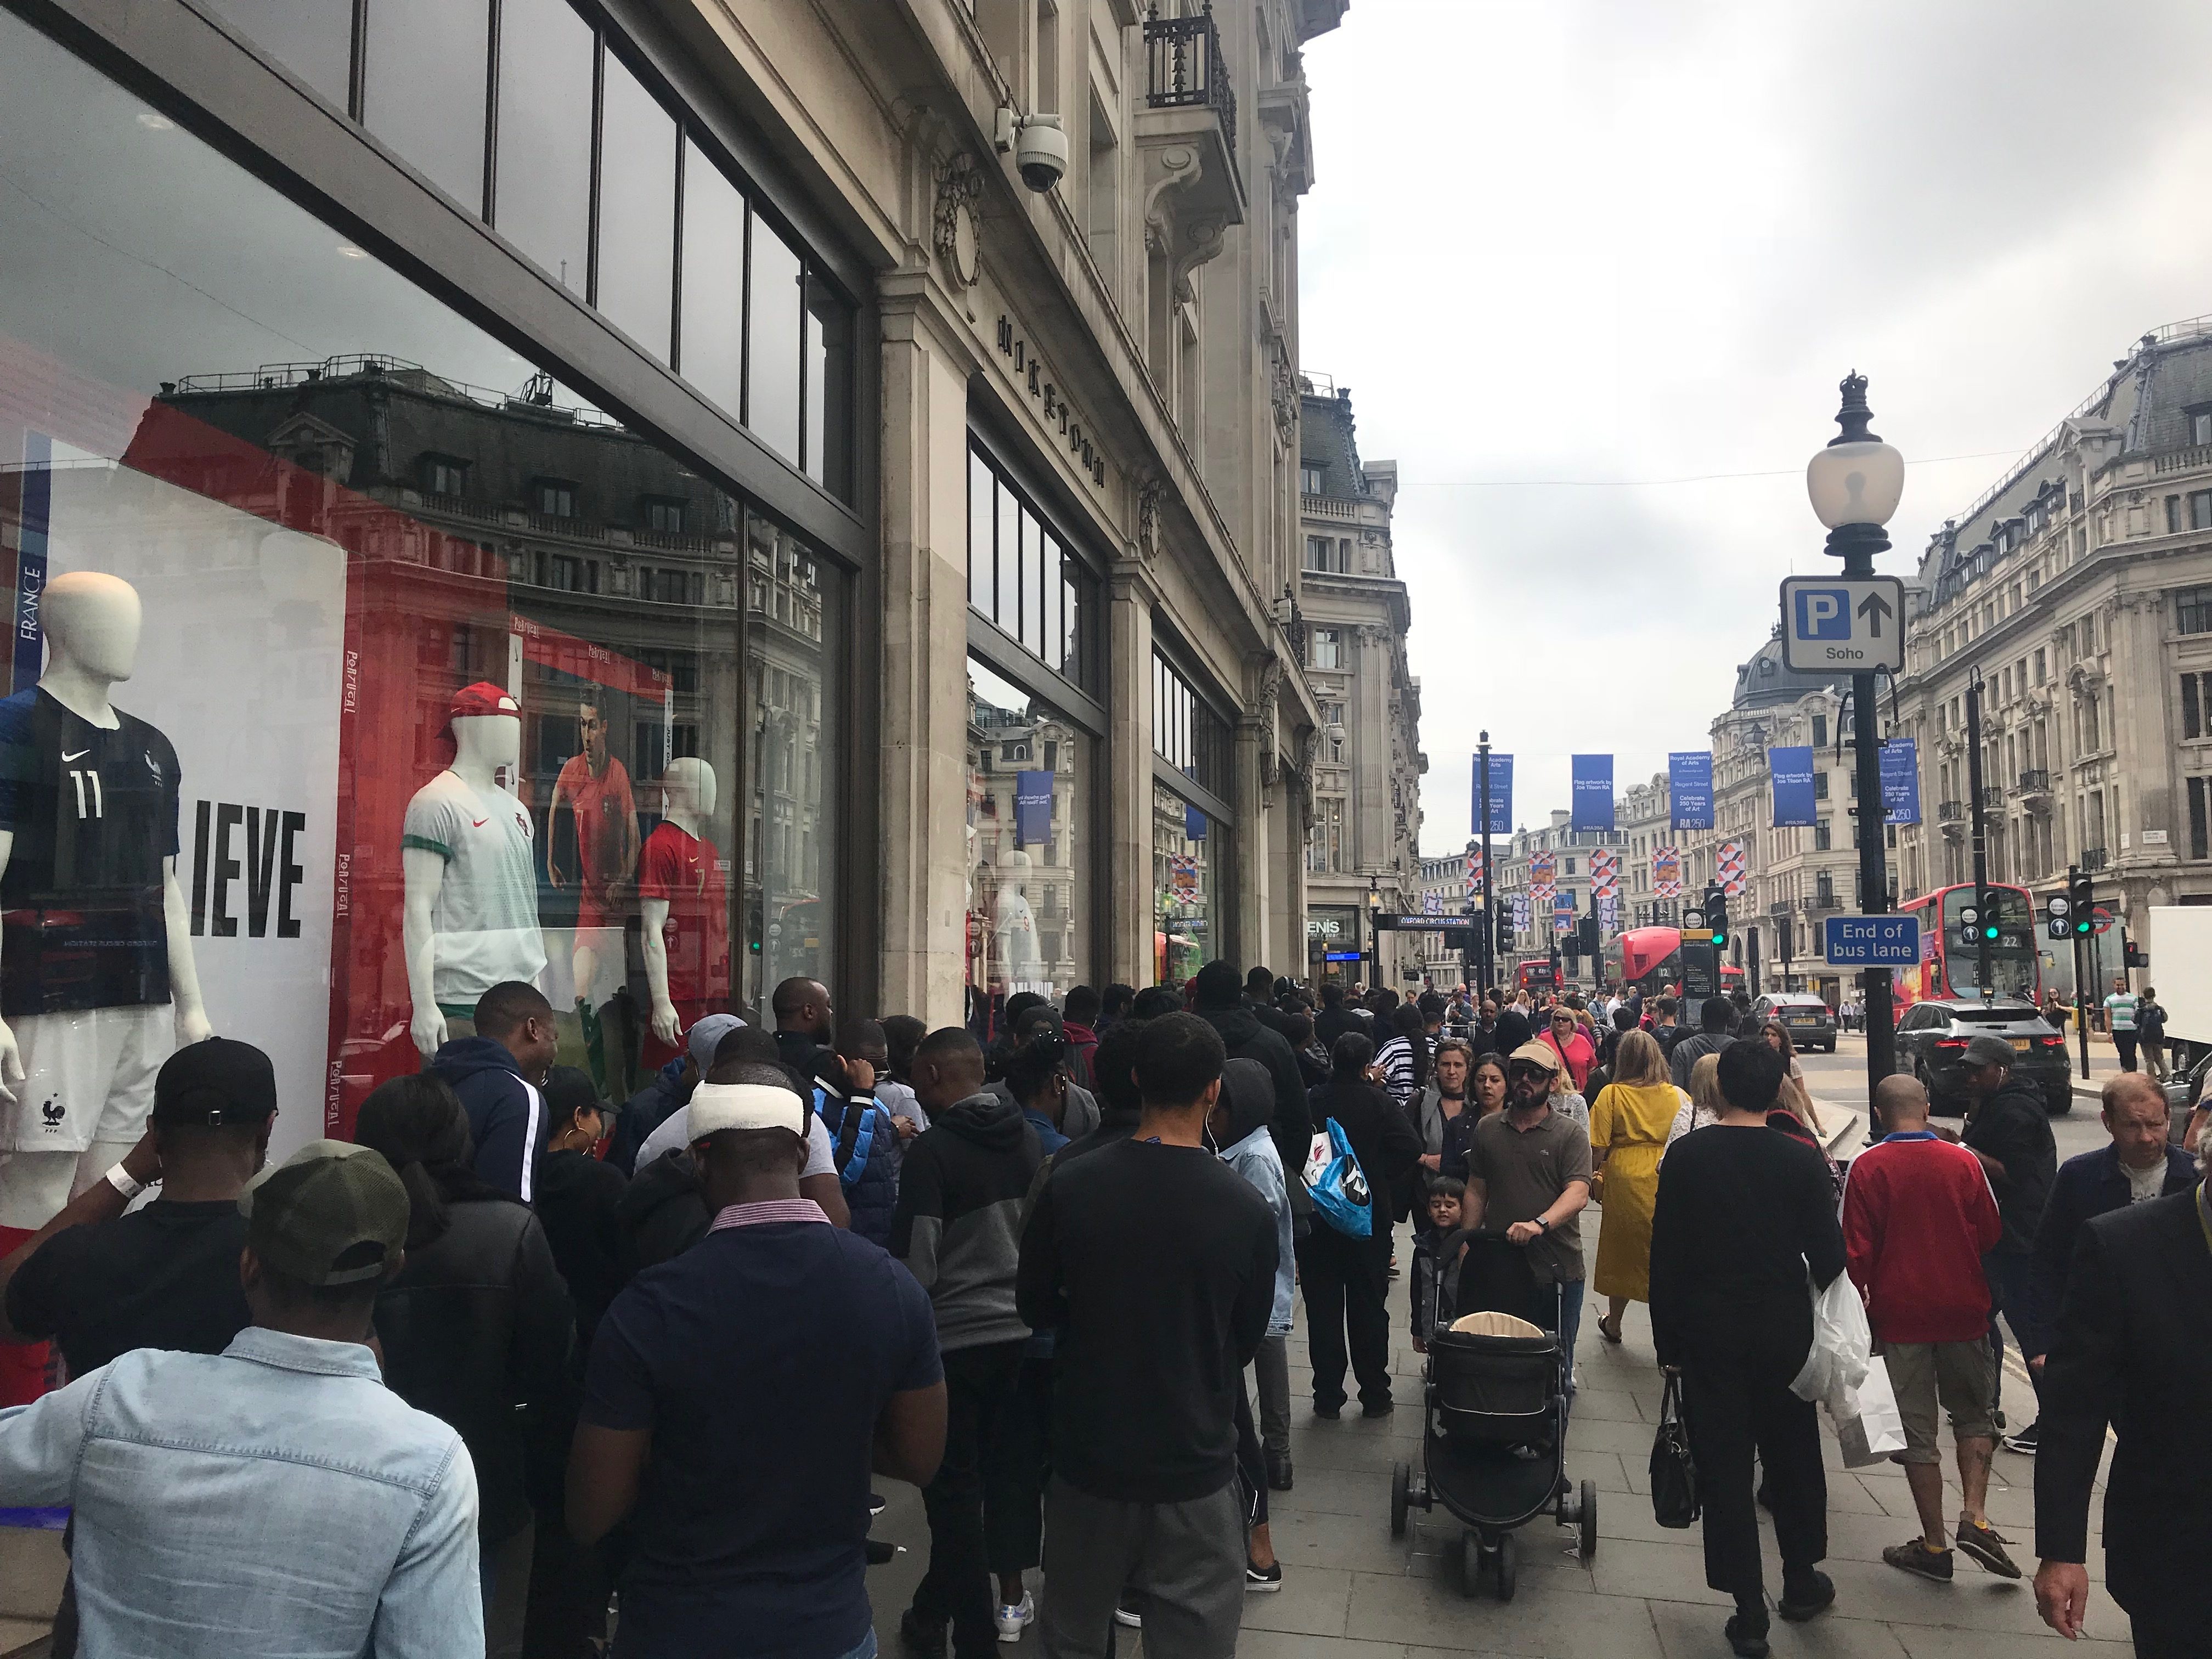 The queue on Oxford Street